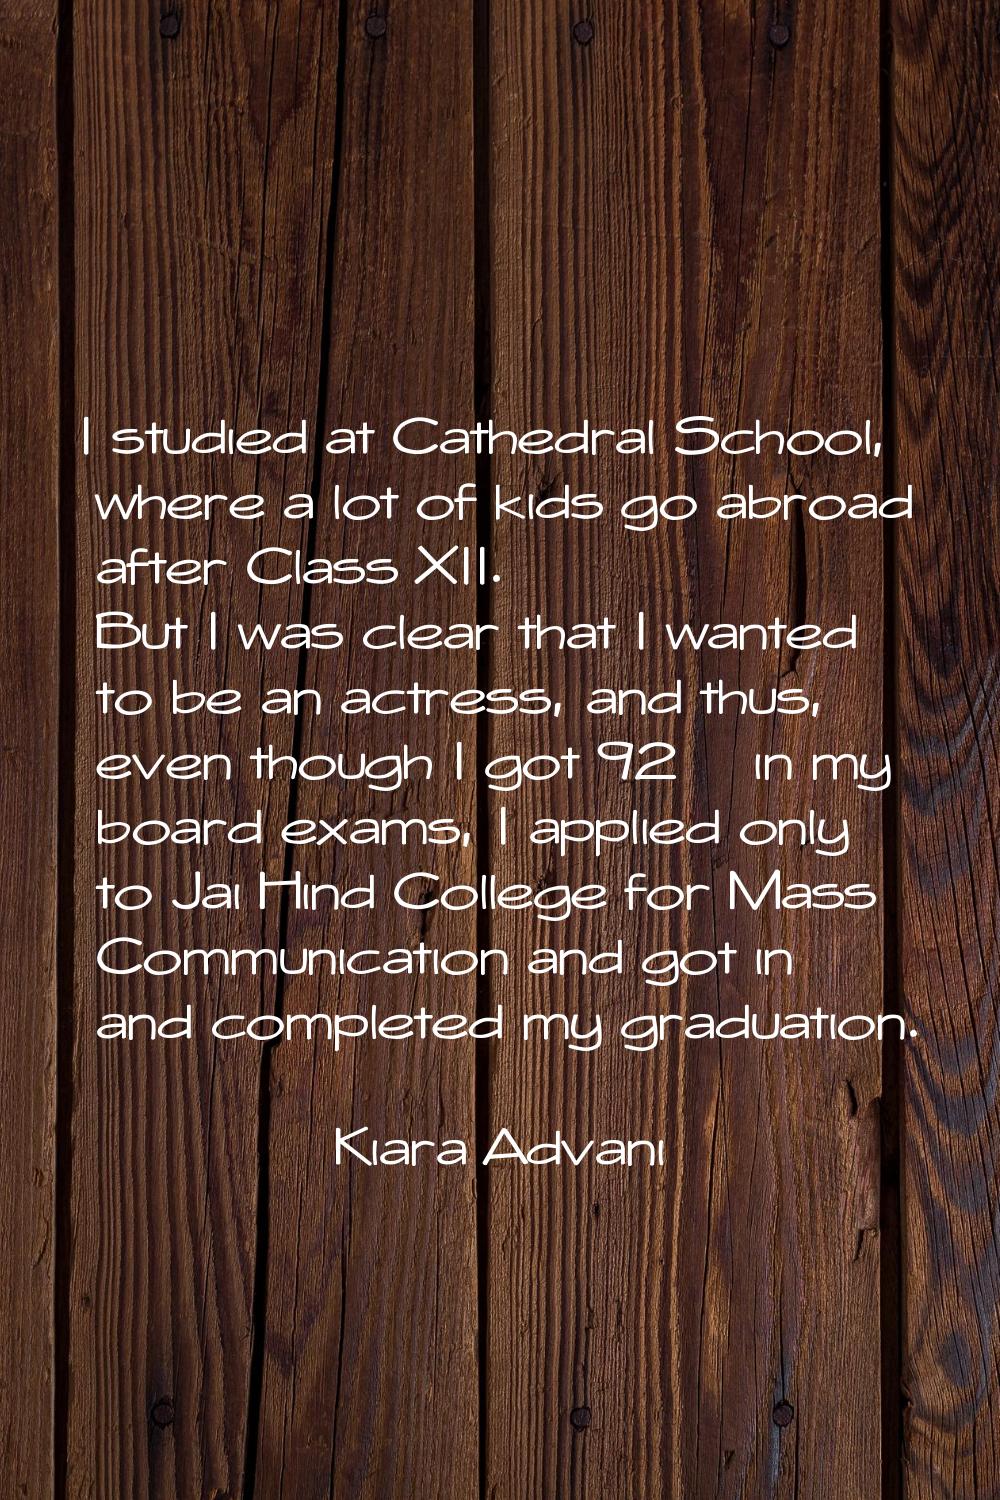 I studied at Cathedral School, where a lot of kids go abroad after Class XII. But I was clear that 